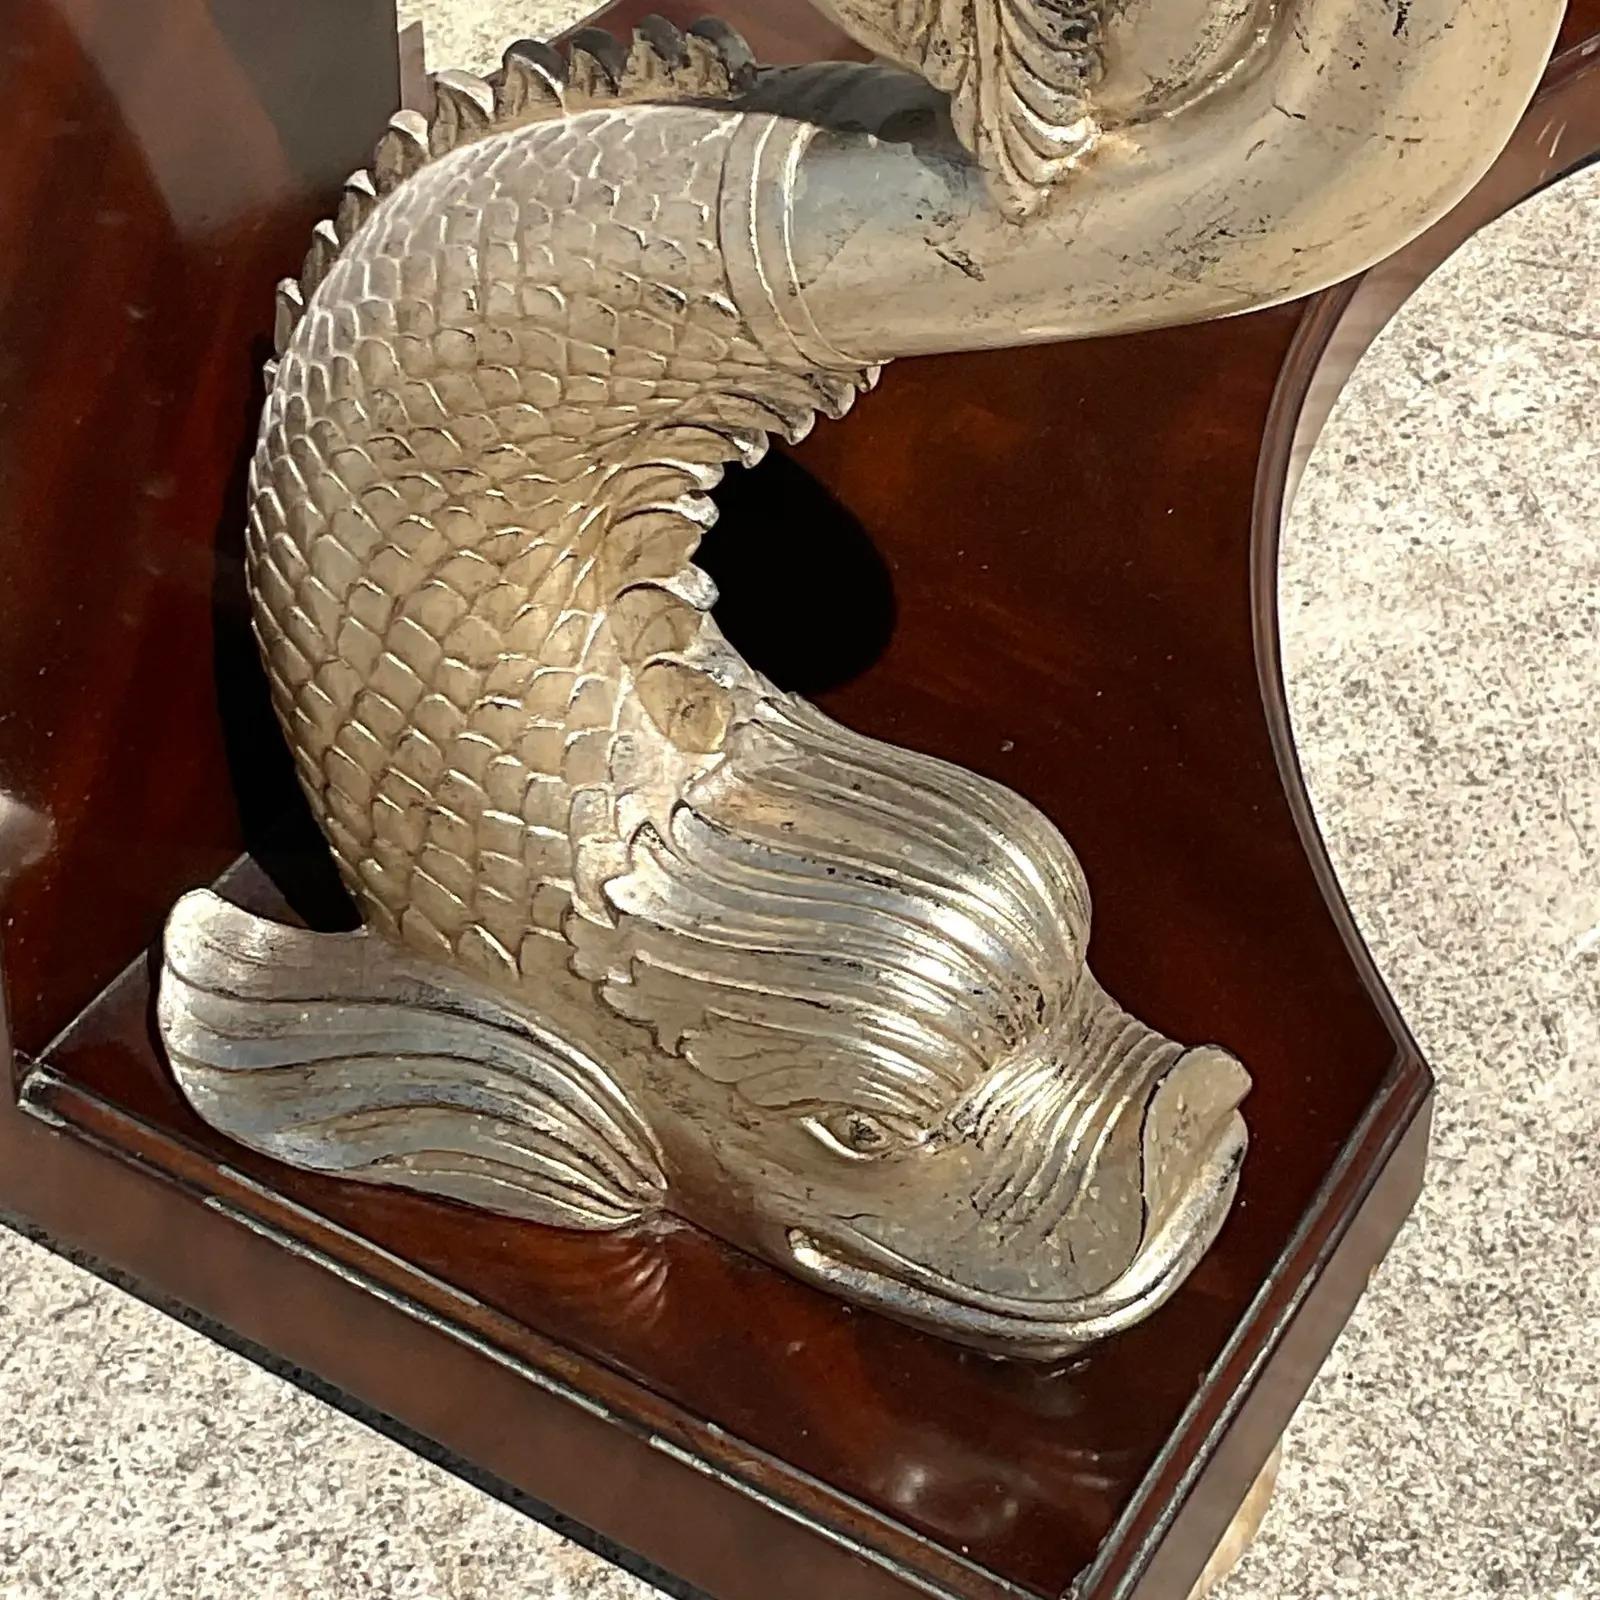 A stunning vintage Regency console table. Made by the iconic Maitland Smith group. A chic carved pair of silver koi fish with a tessellated stone top. Inset beveled mirror. Acquired from a Palm Beach estate